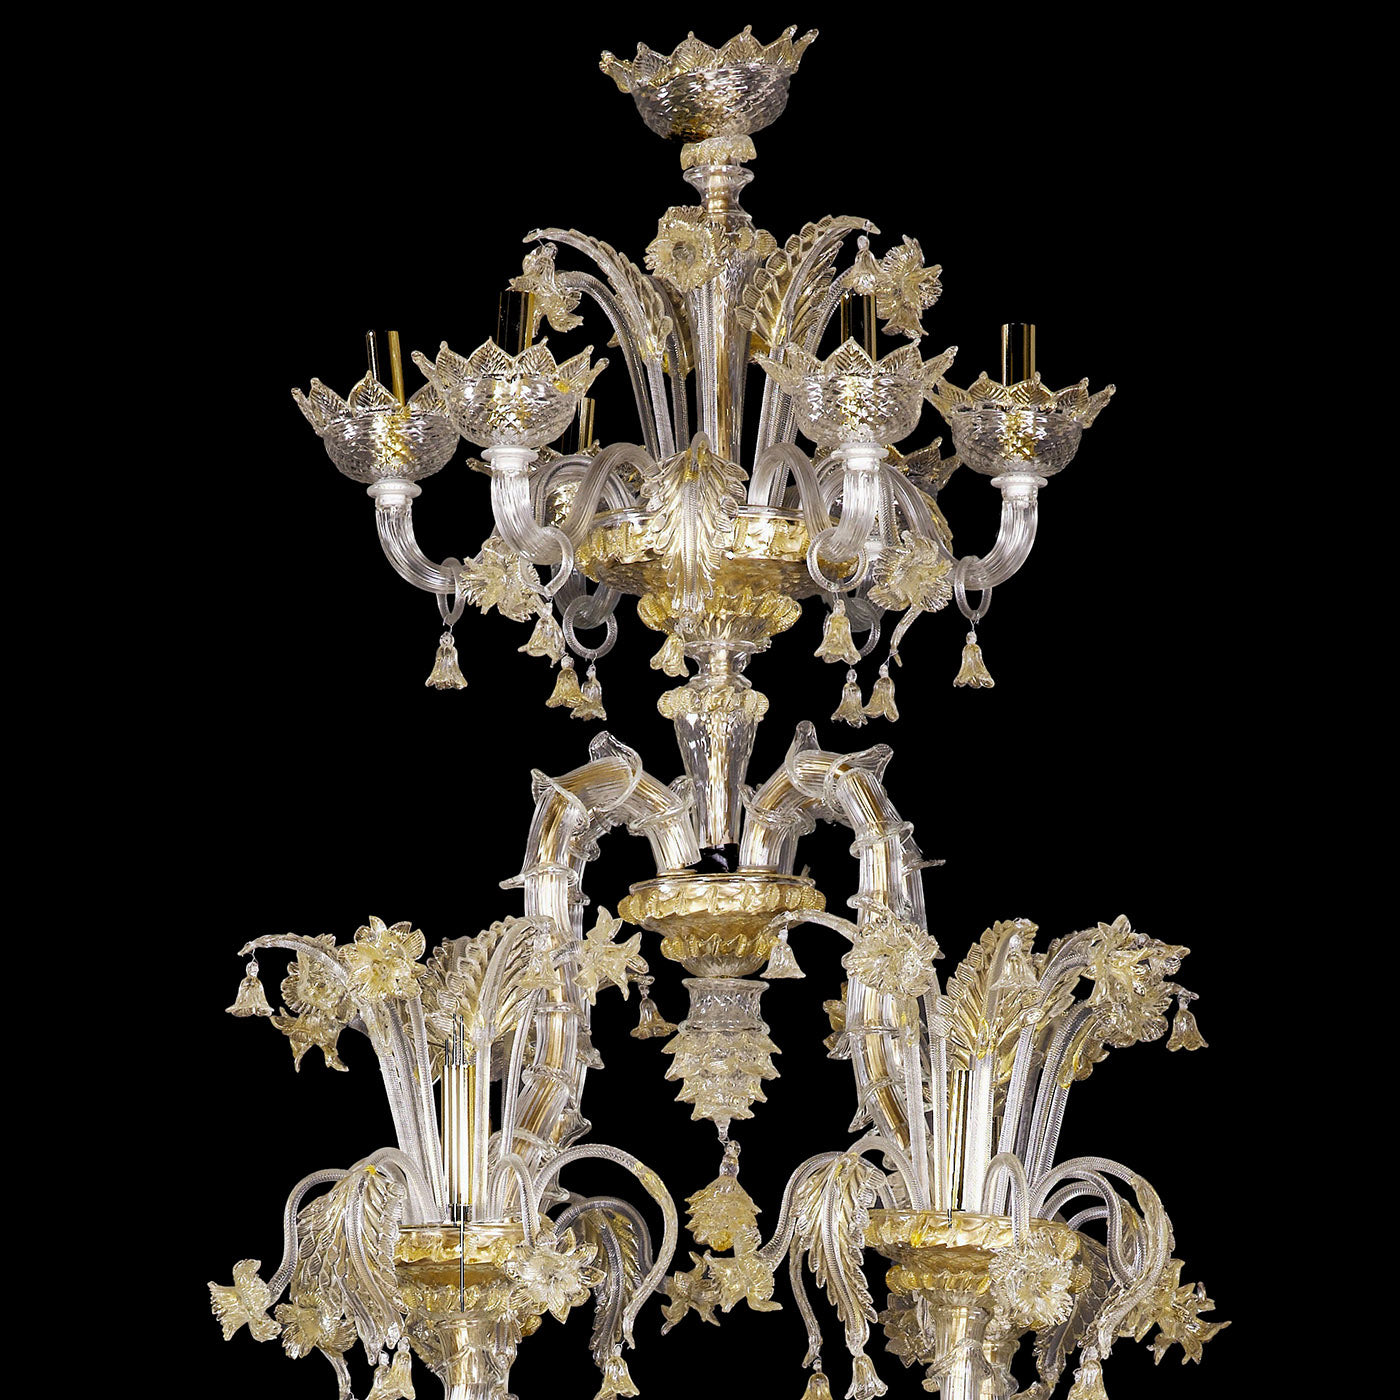 Rezzonico-style Gold and Crystal Chandelier #2 - Alternative view 5